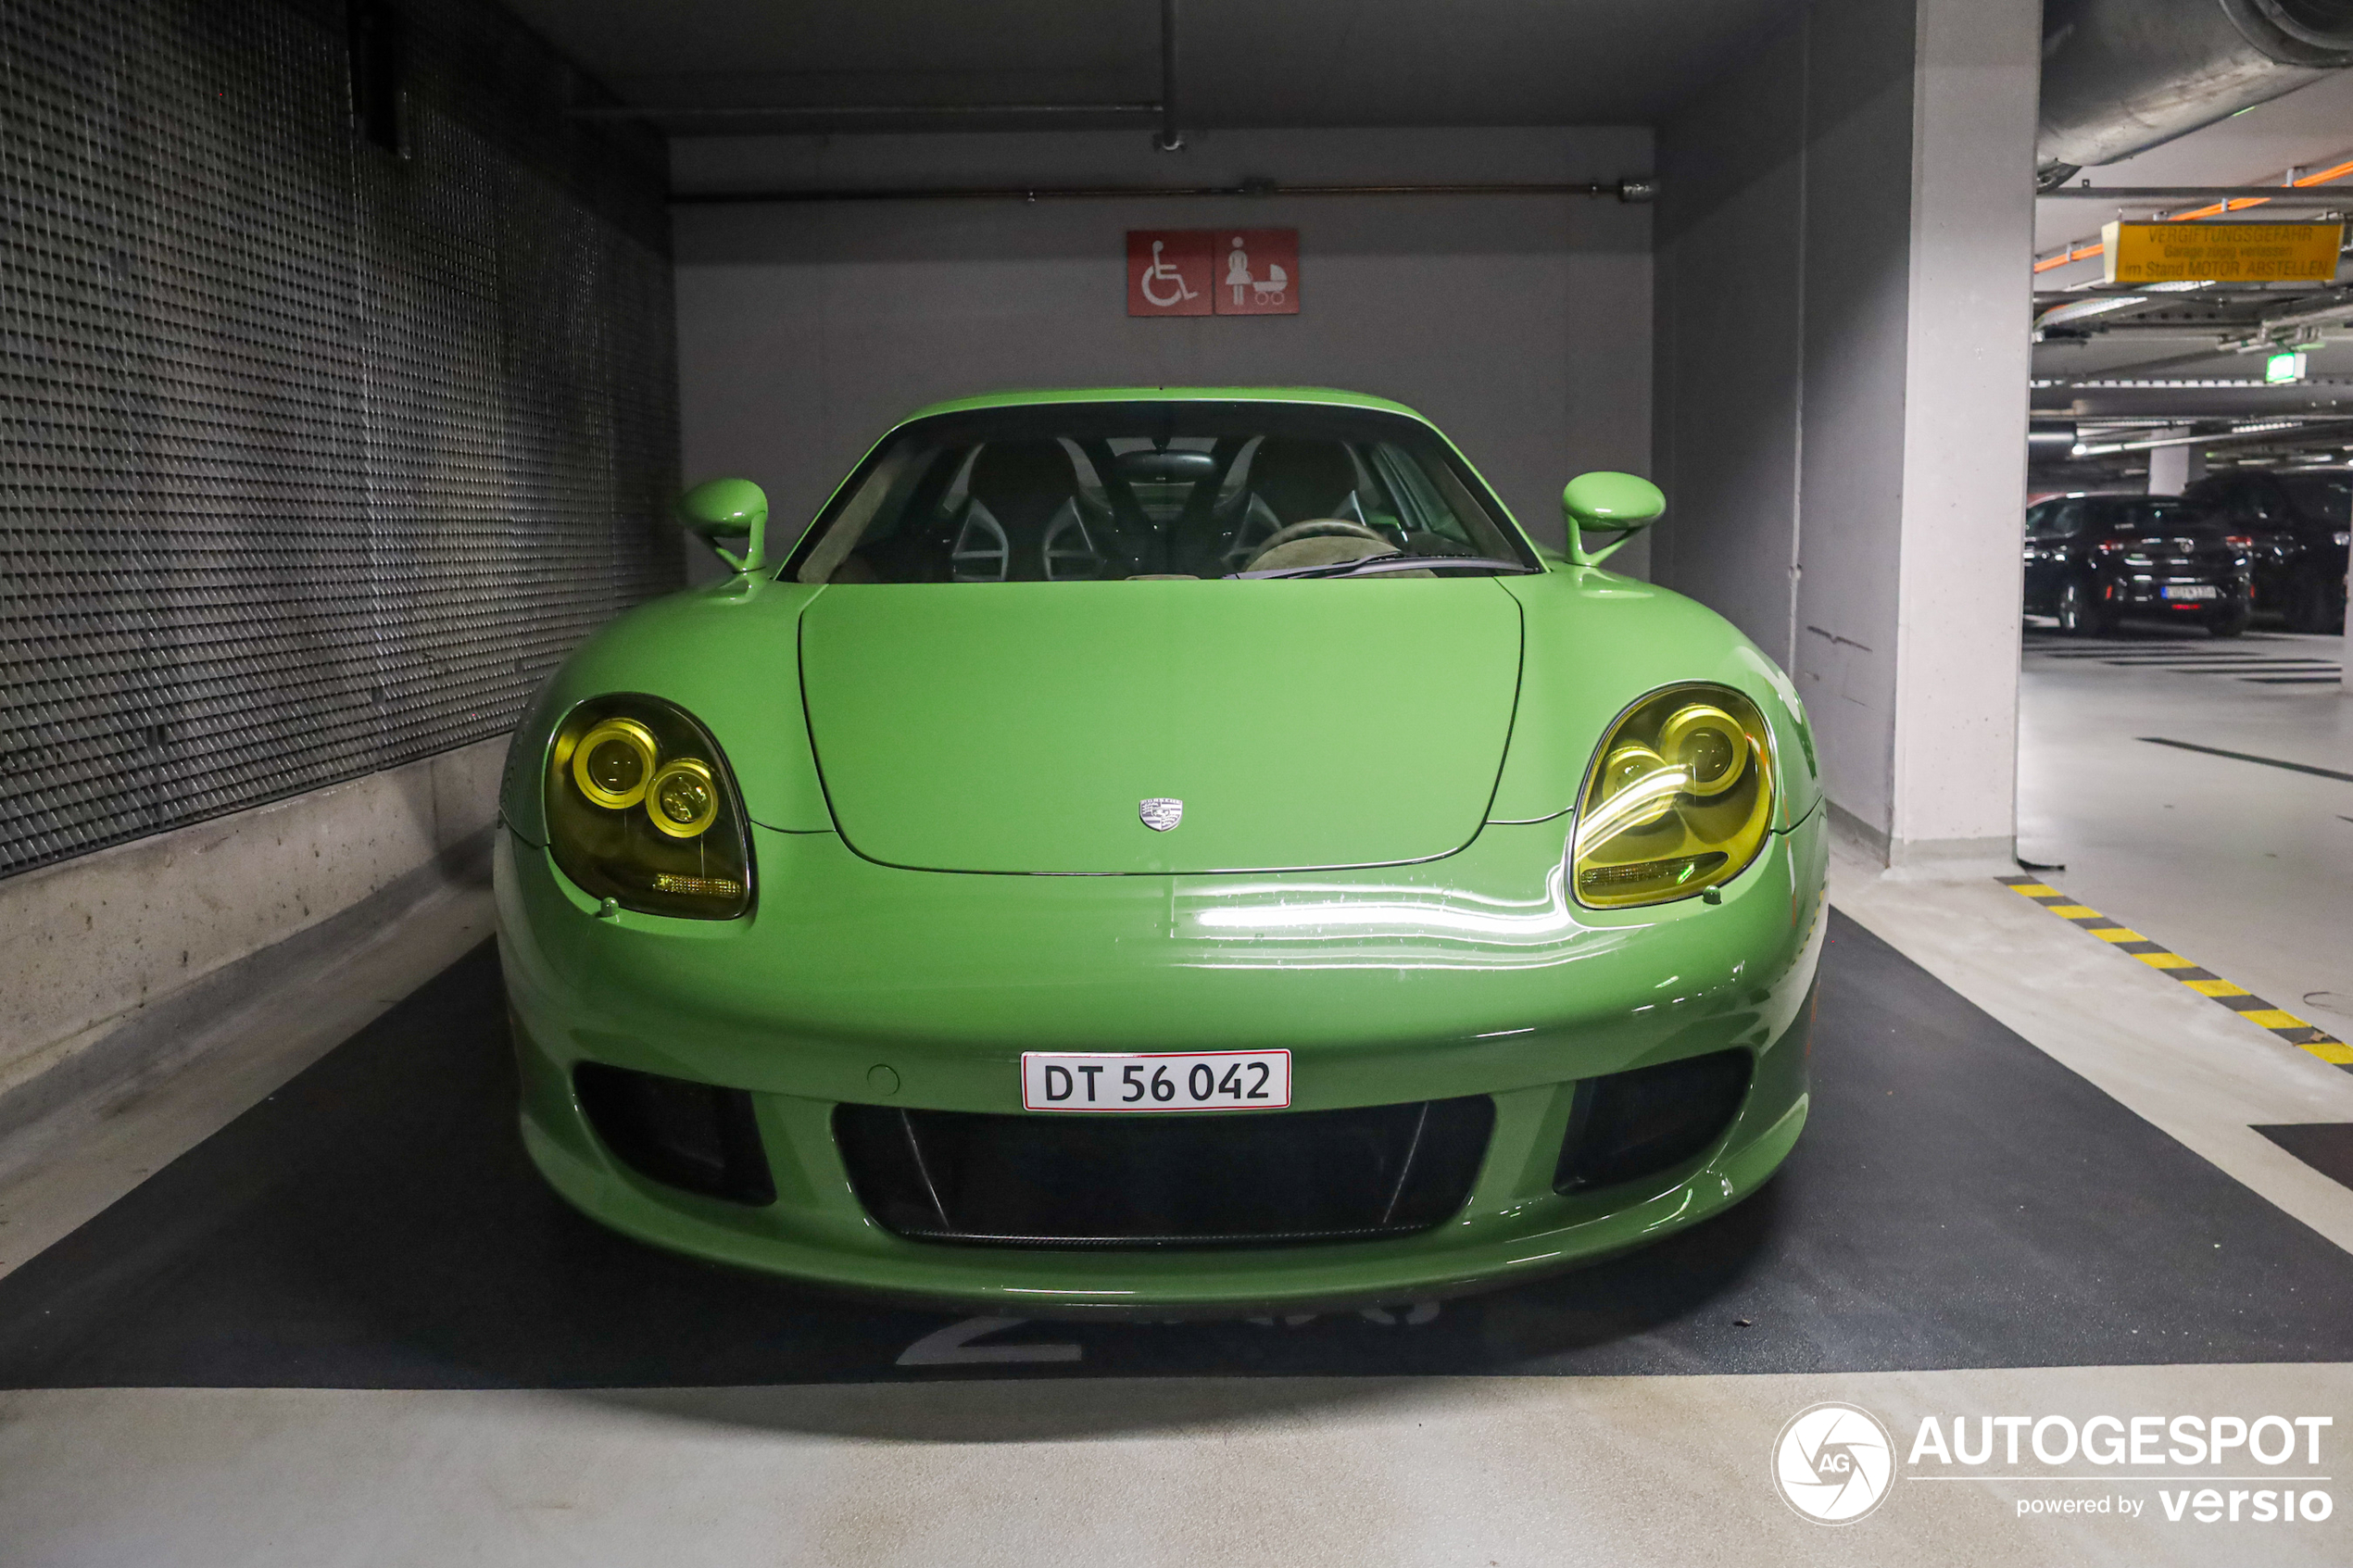 A very special Carrera GT shows up in Düsseldorf